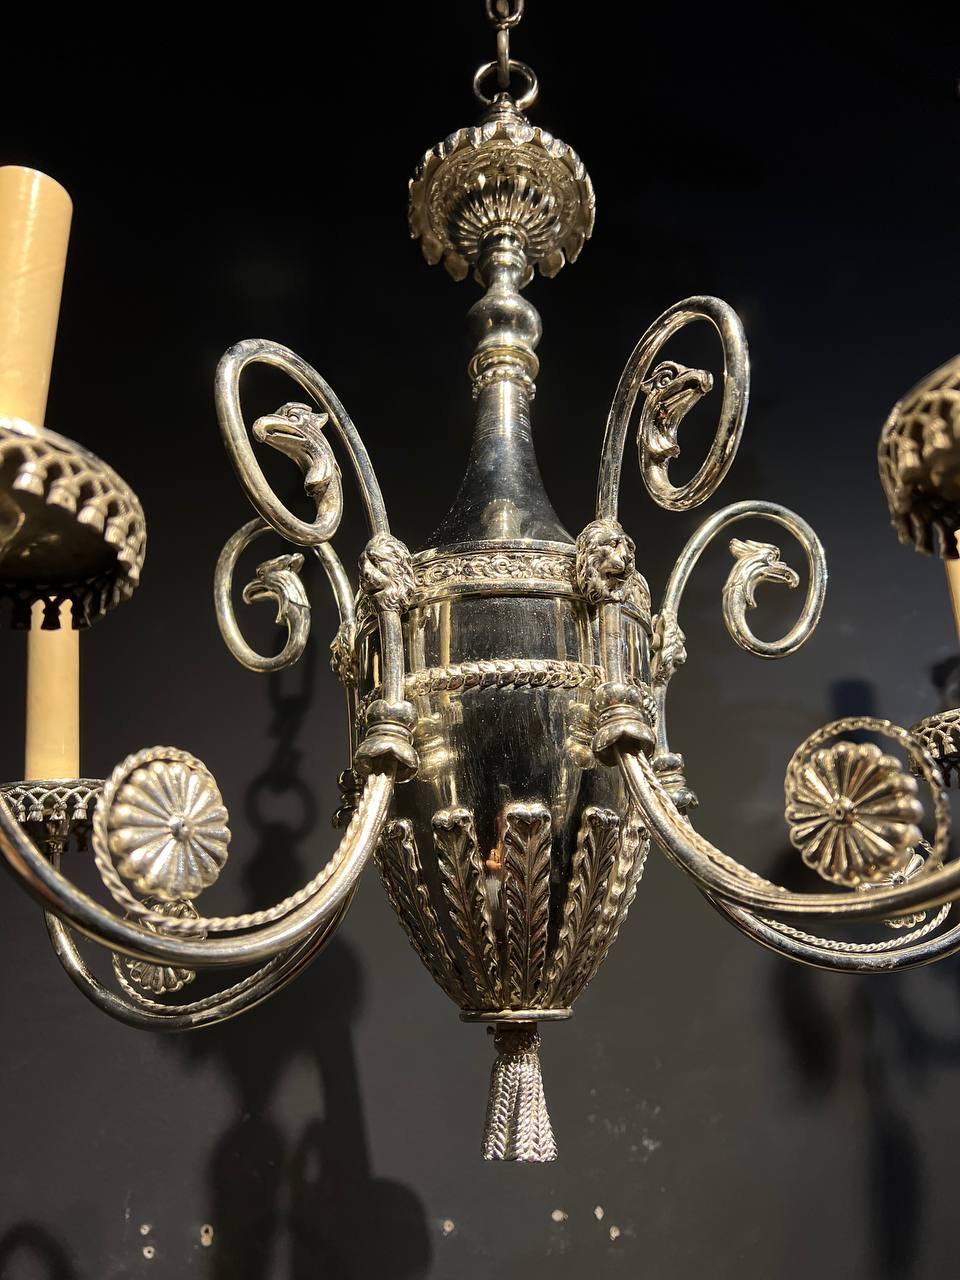 A circa 1900 Caldwell silver plated chandelier with lions and eagle heads